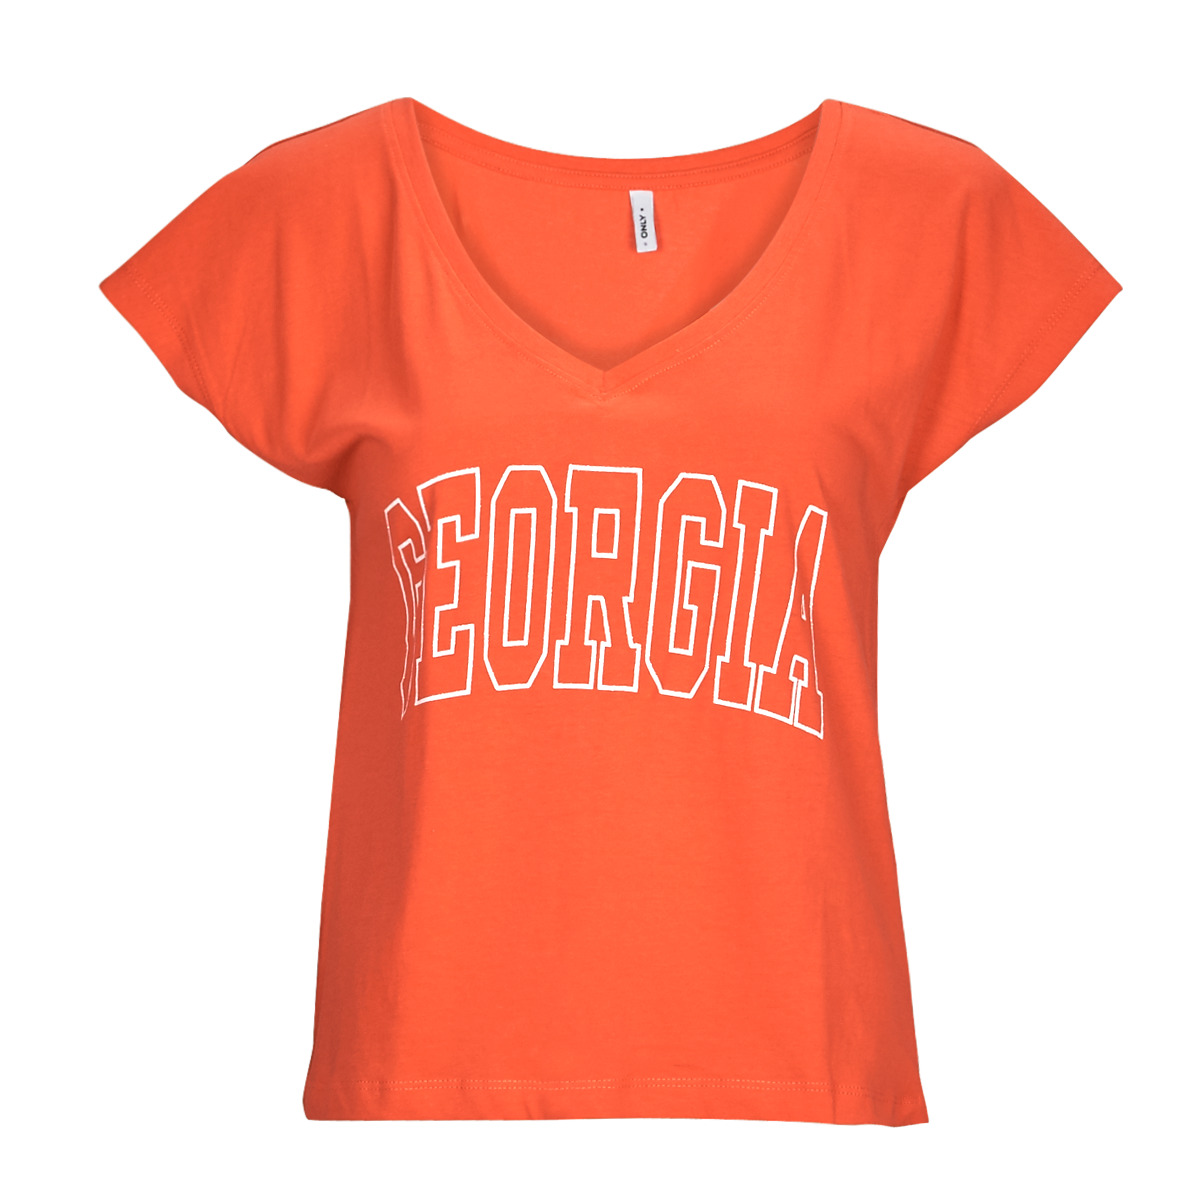 Free Women ONLKELLY Clothing delivery t-shirts | Only - - JRS V-NECK Spartoo short-sleeved Orange CS BOX S/S ! TOP NET